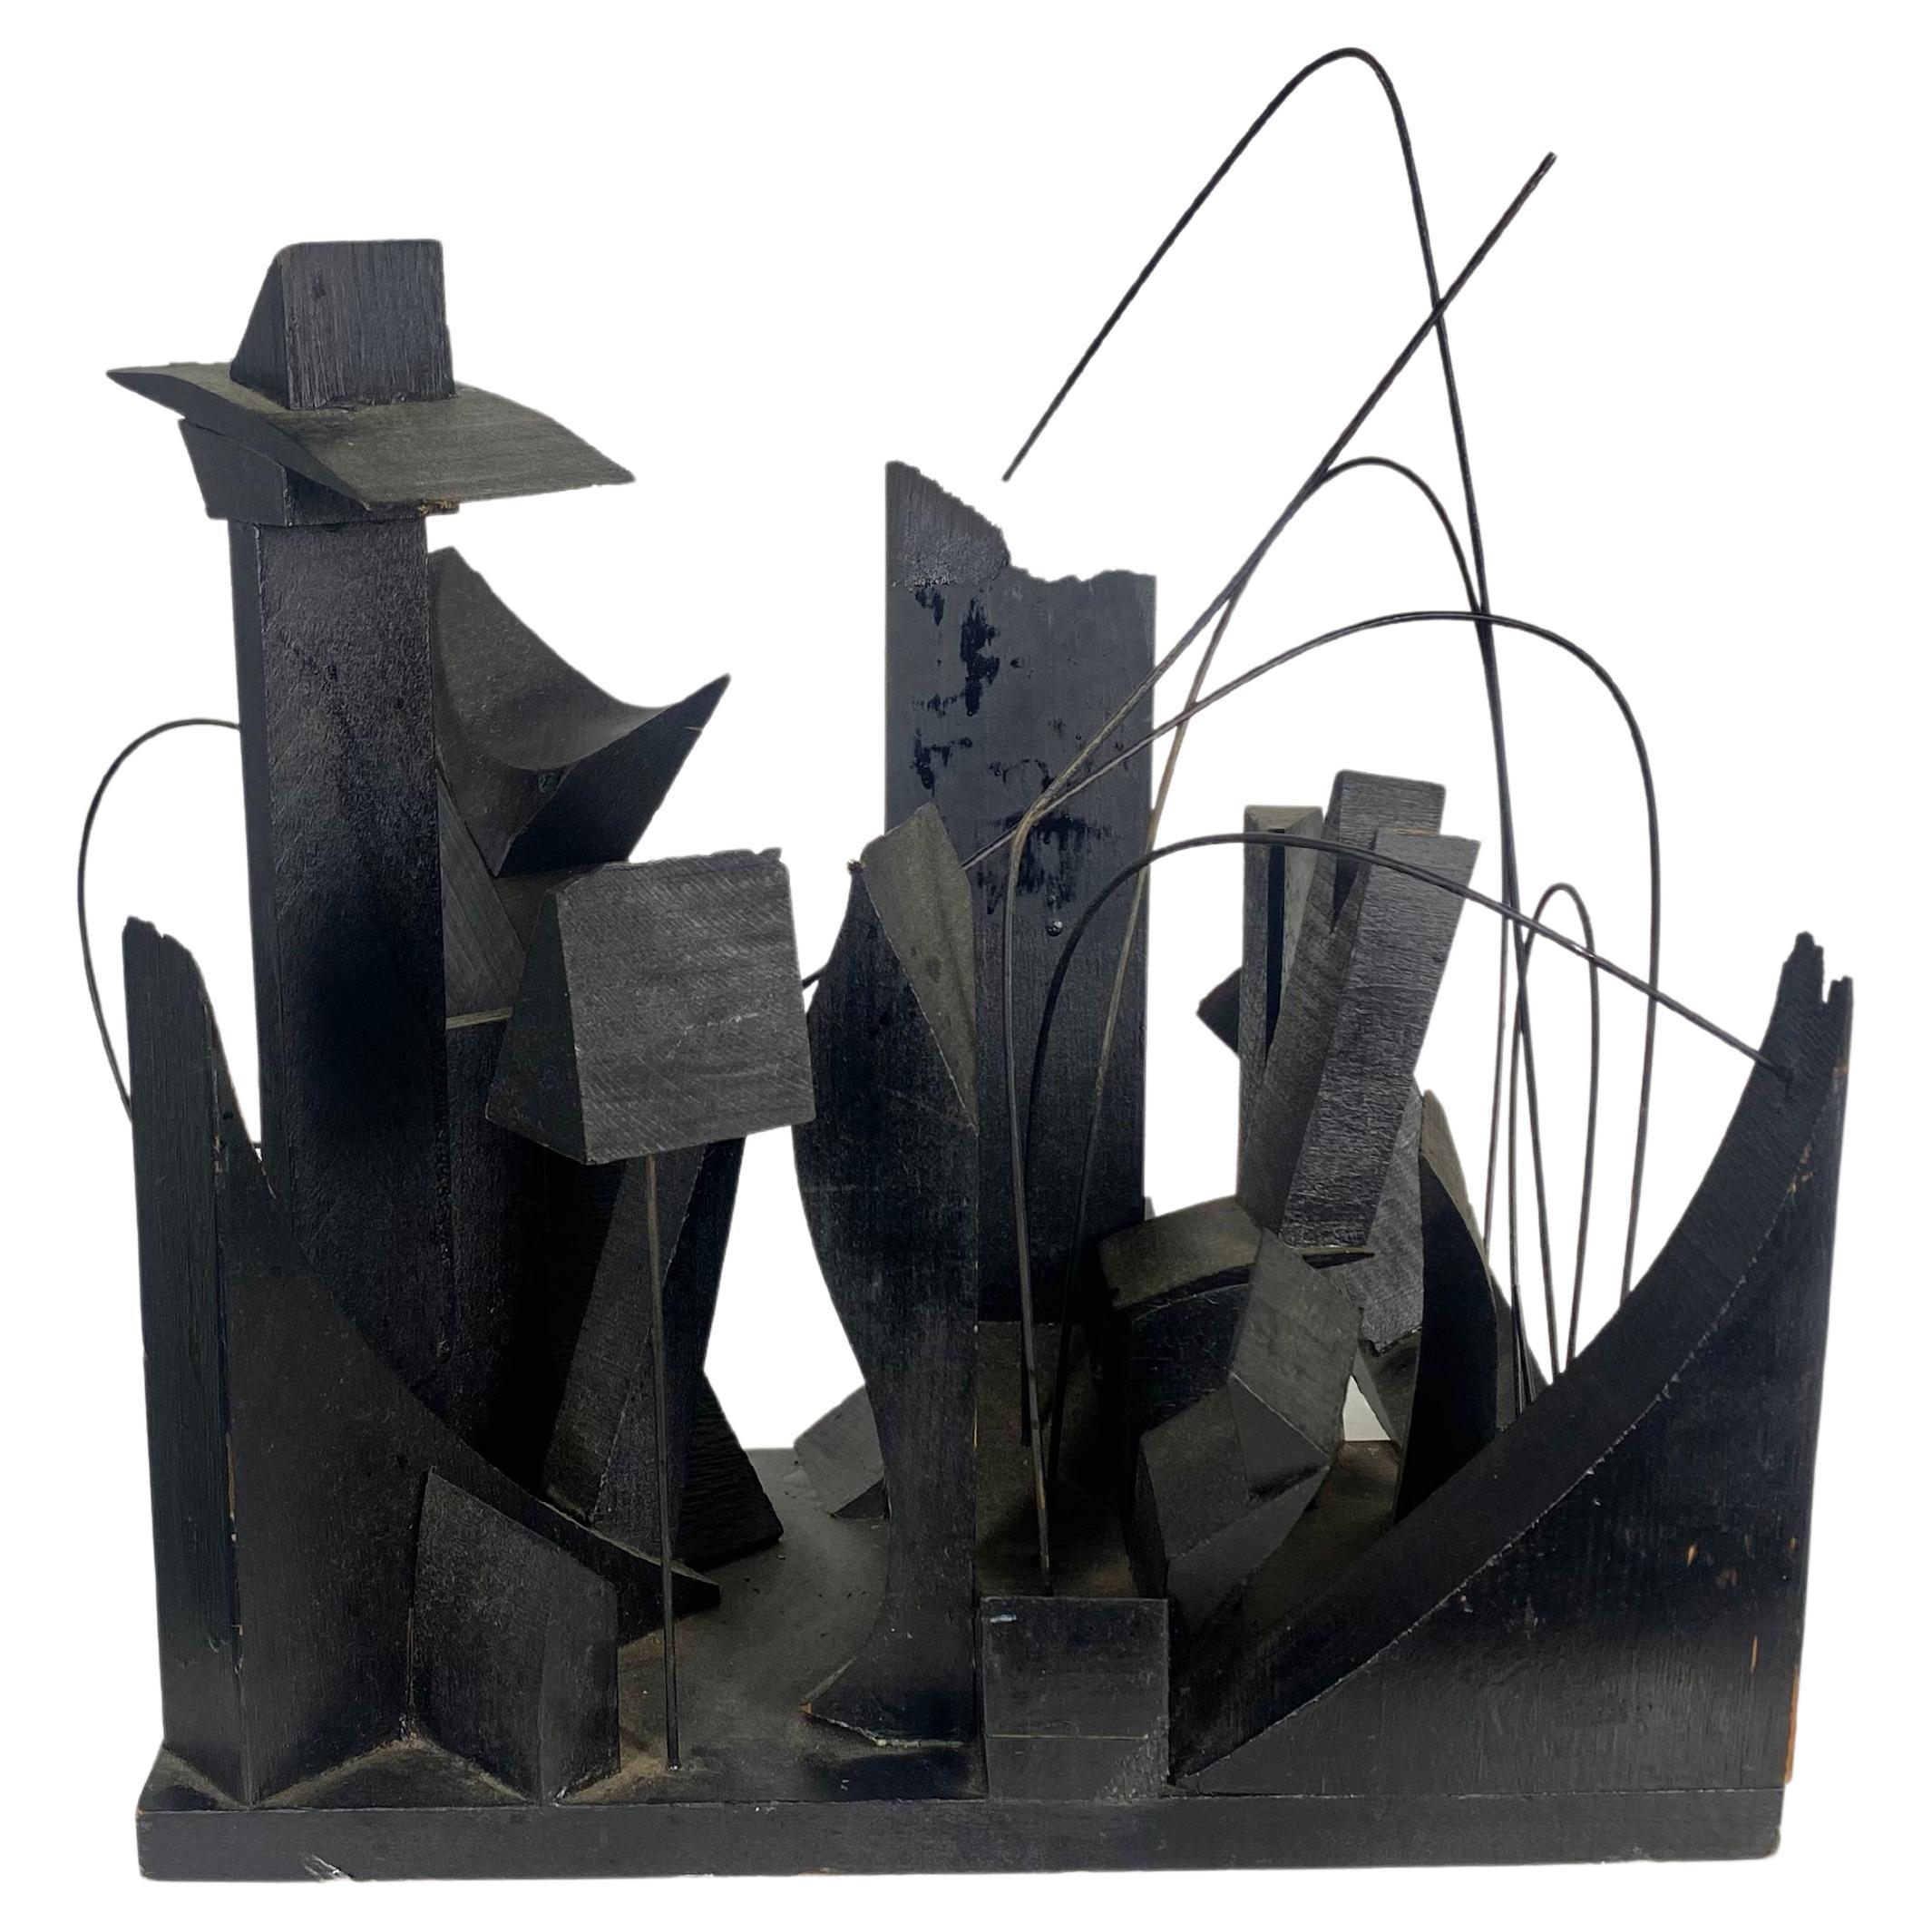 Modernist Abstract Wood and Wire Sculpture Manner of Louise Nevelson